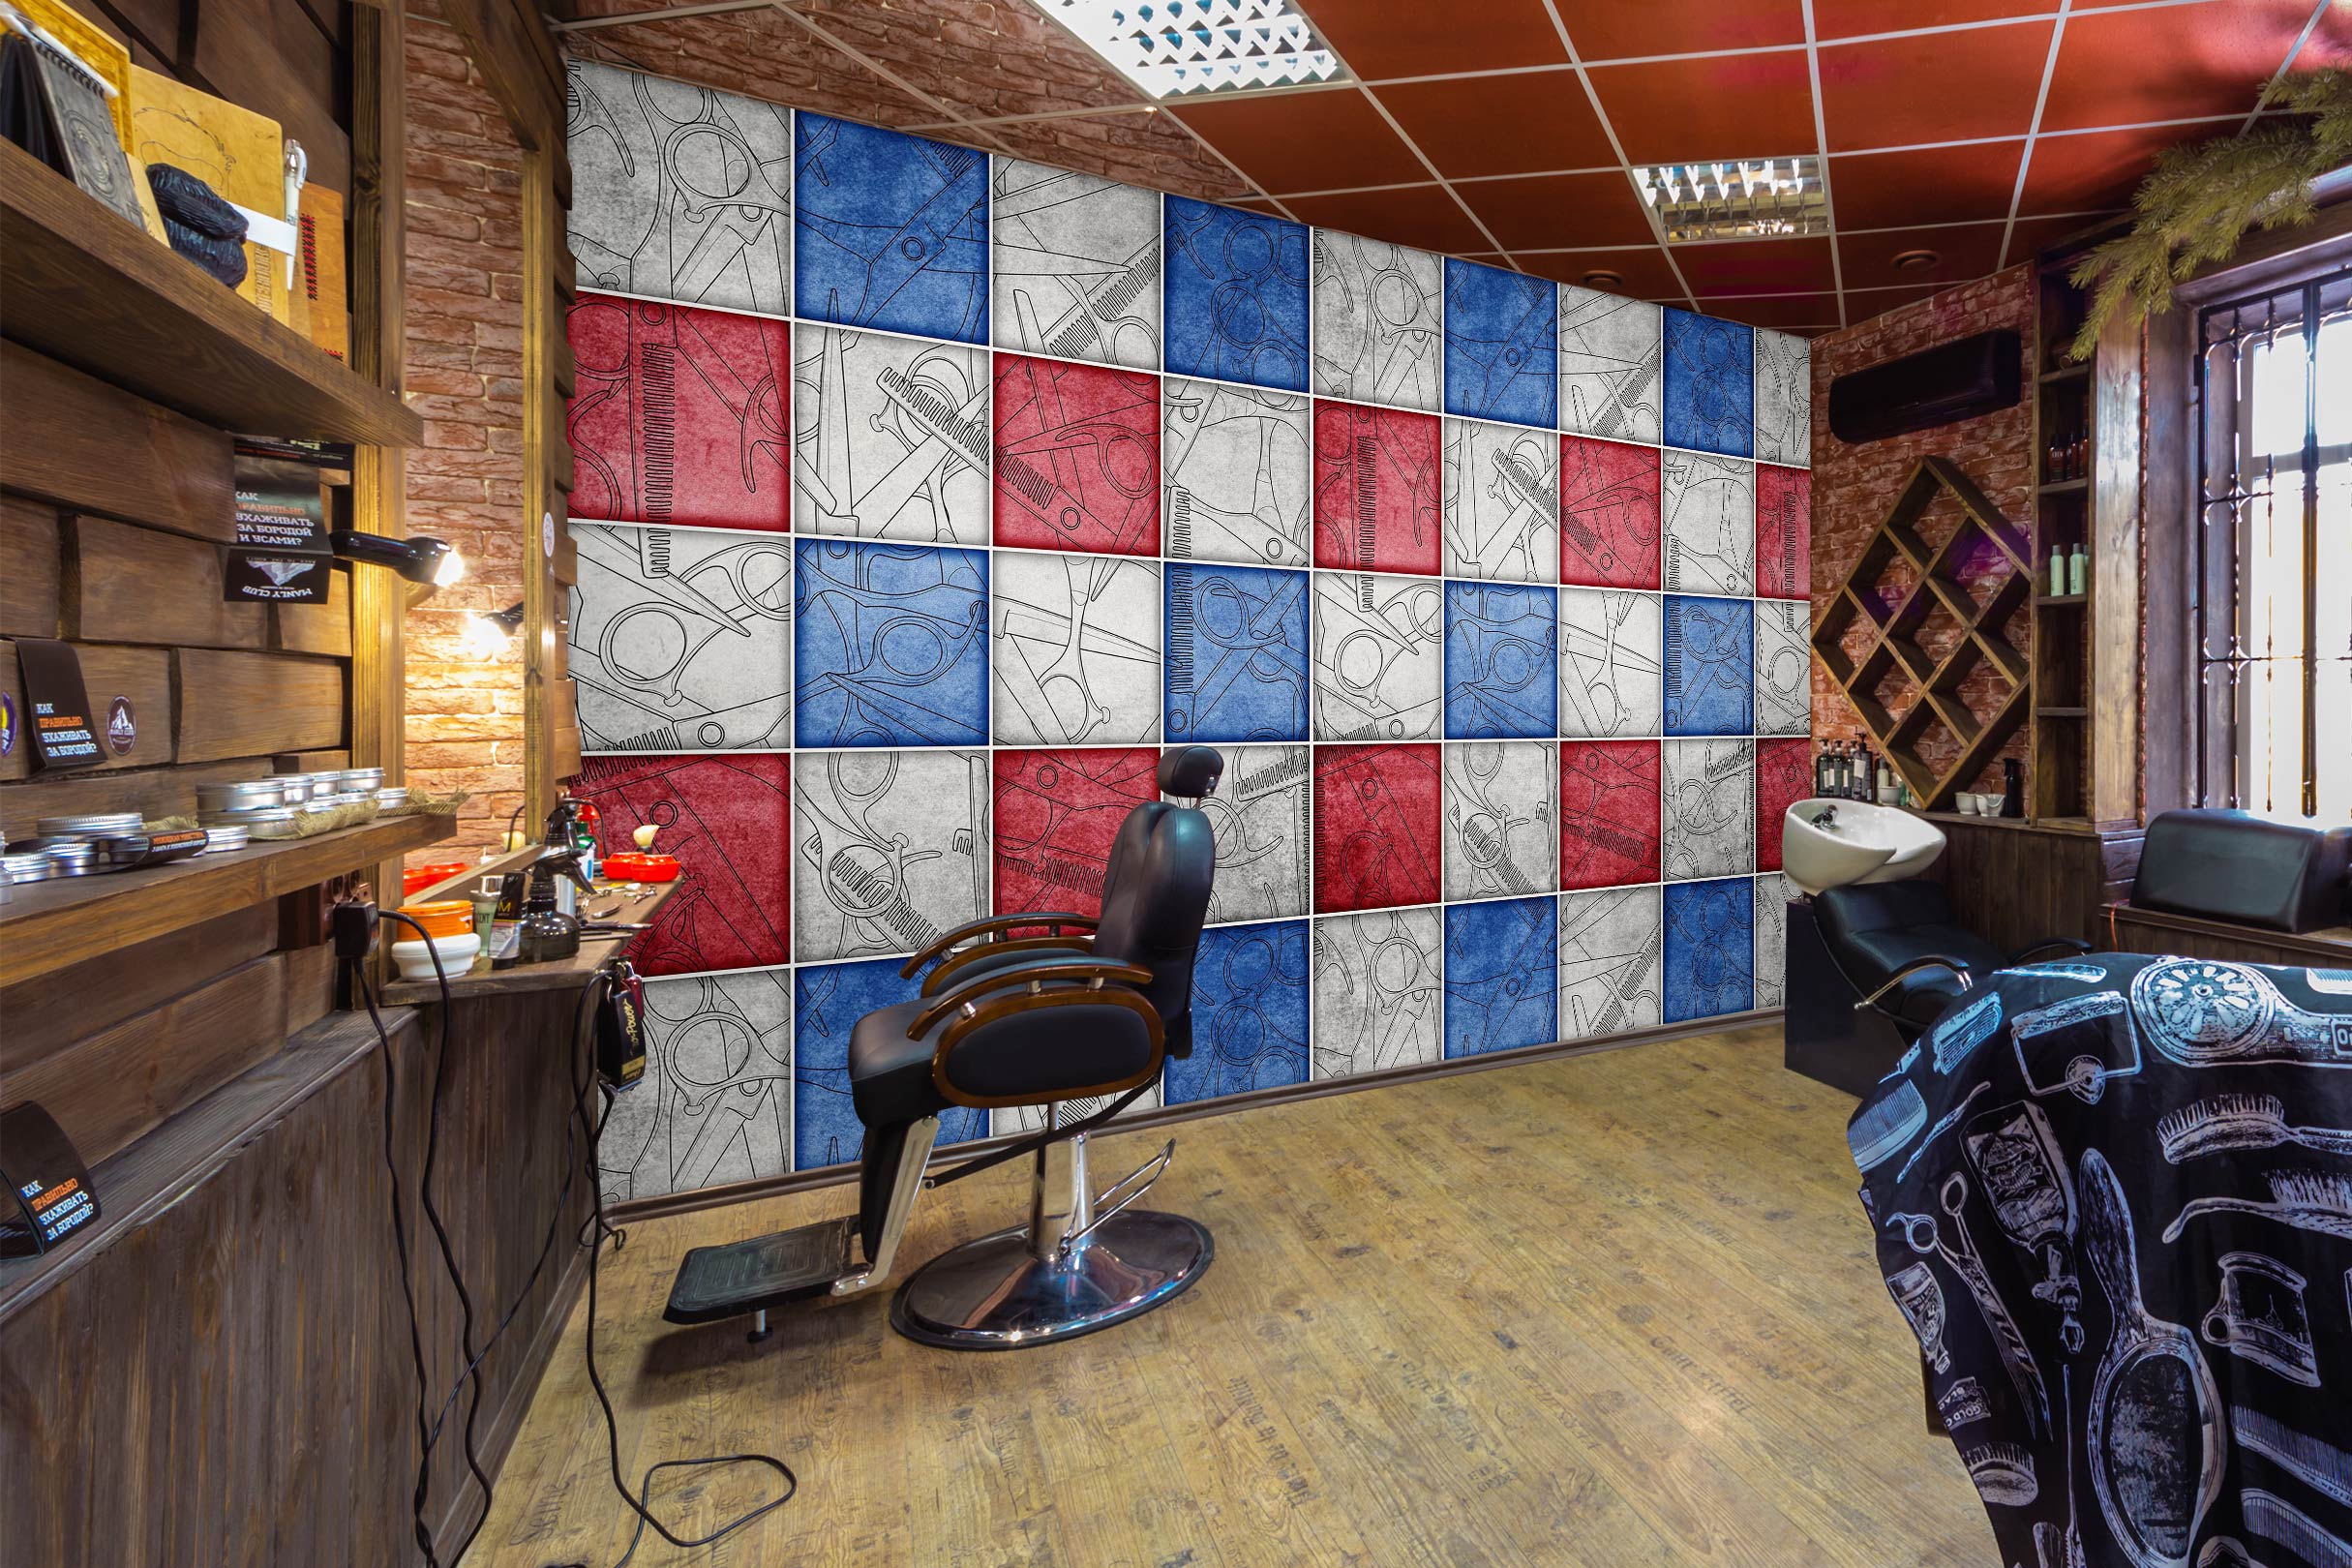 3D Blue Red Square Grid 115187 Barber Shop Wall Murals